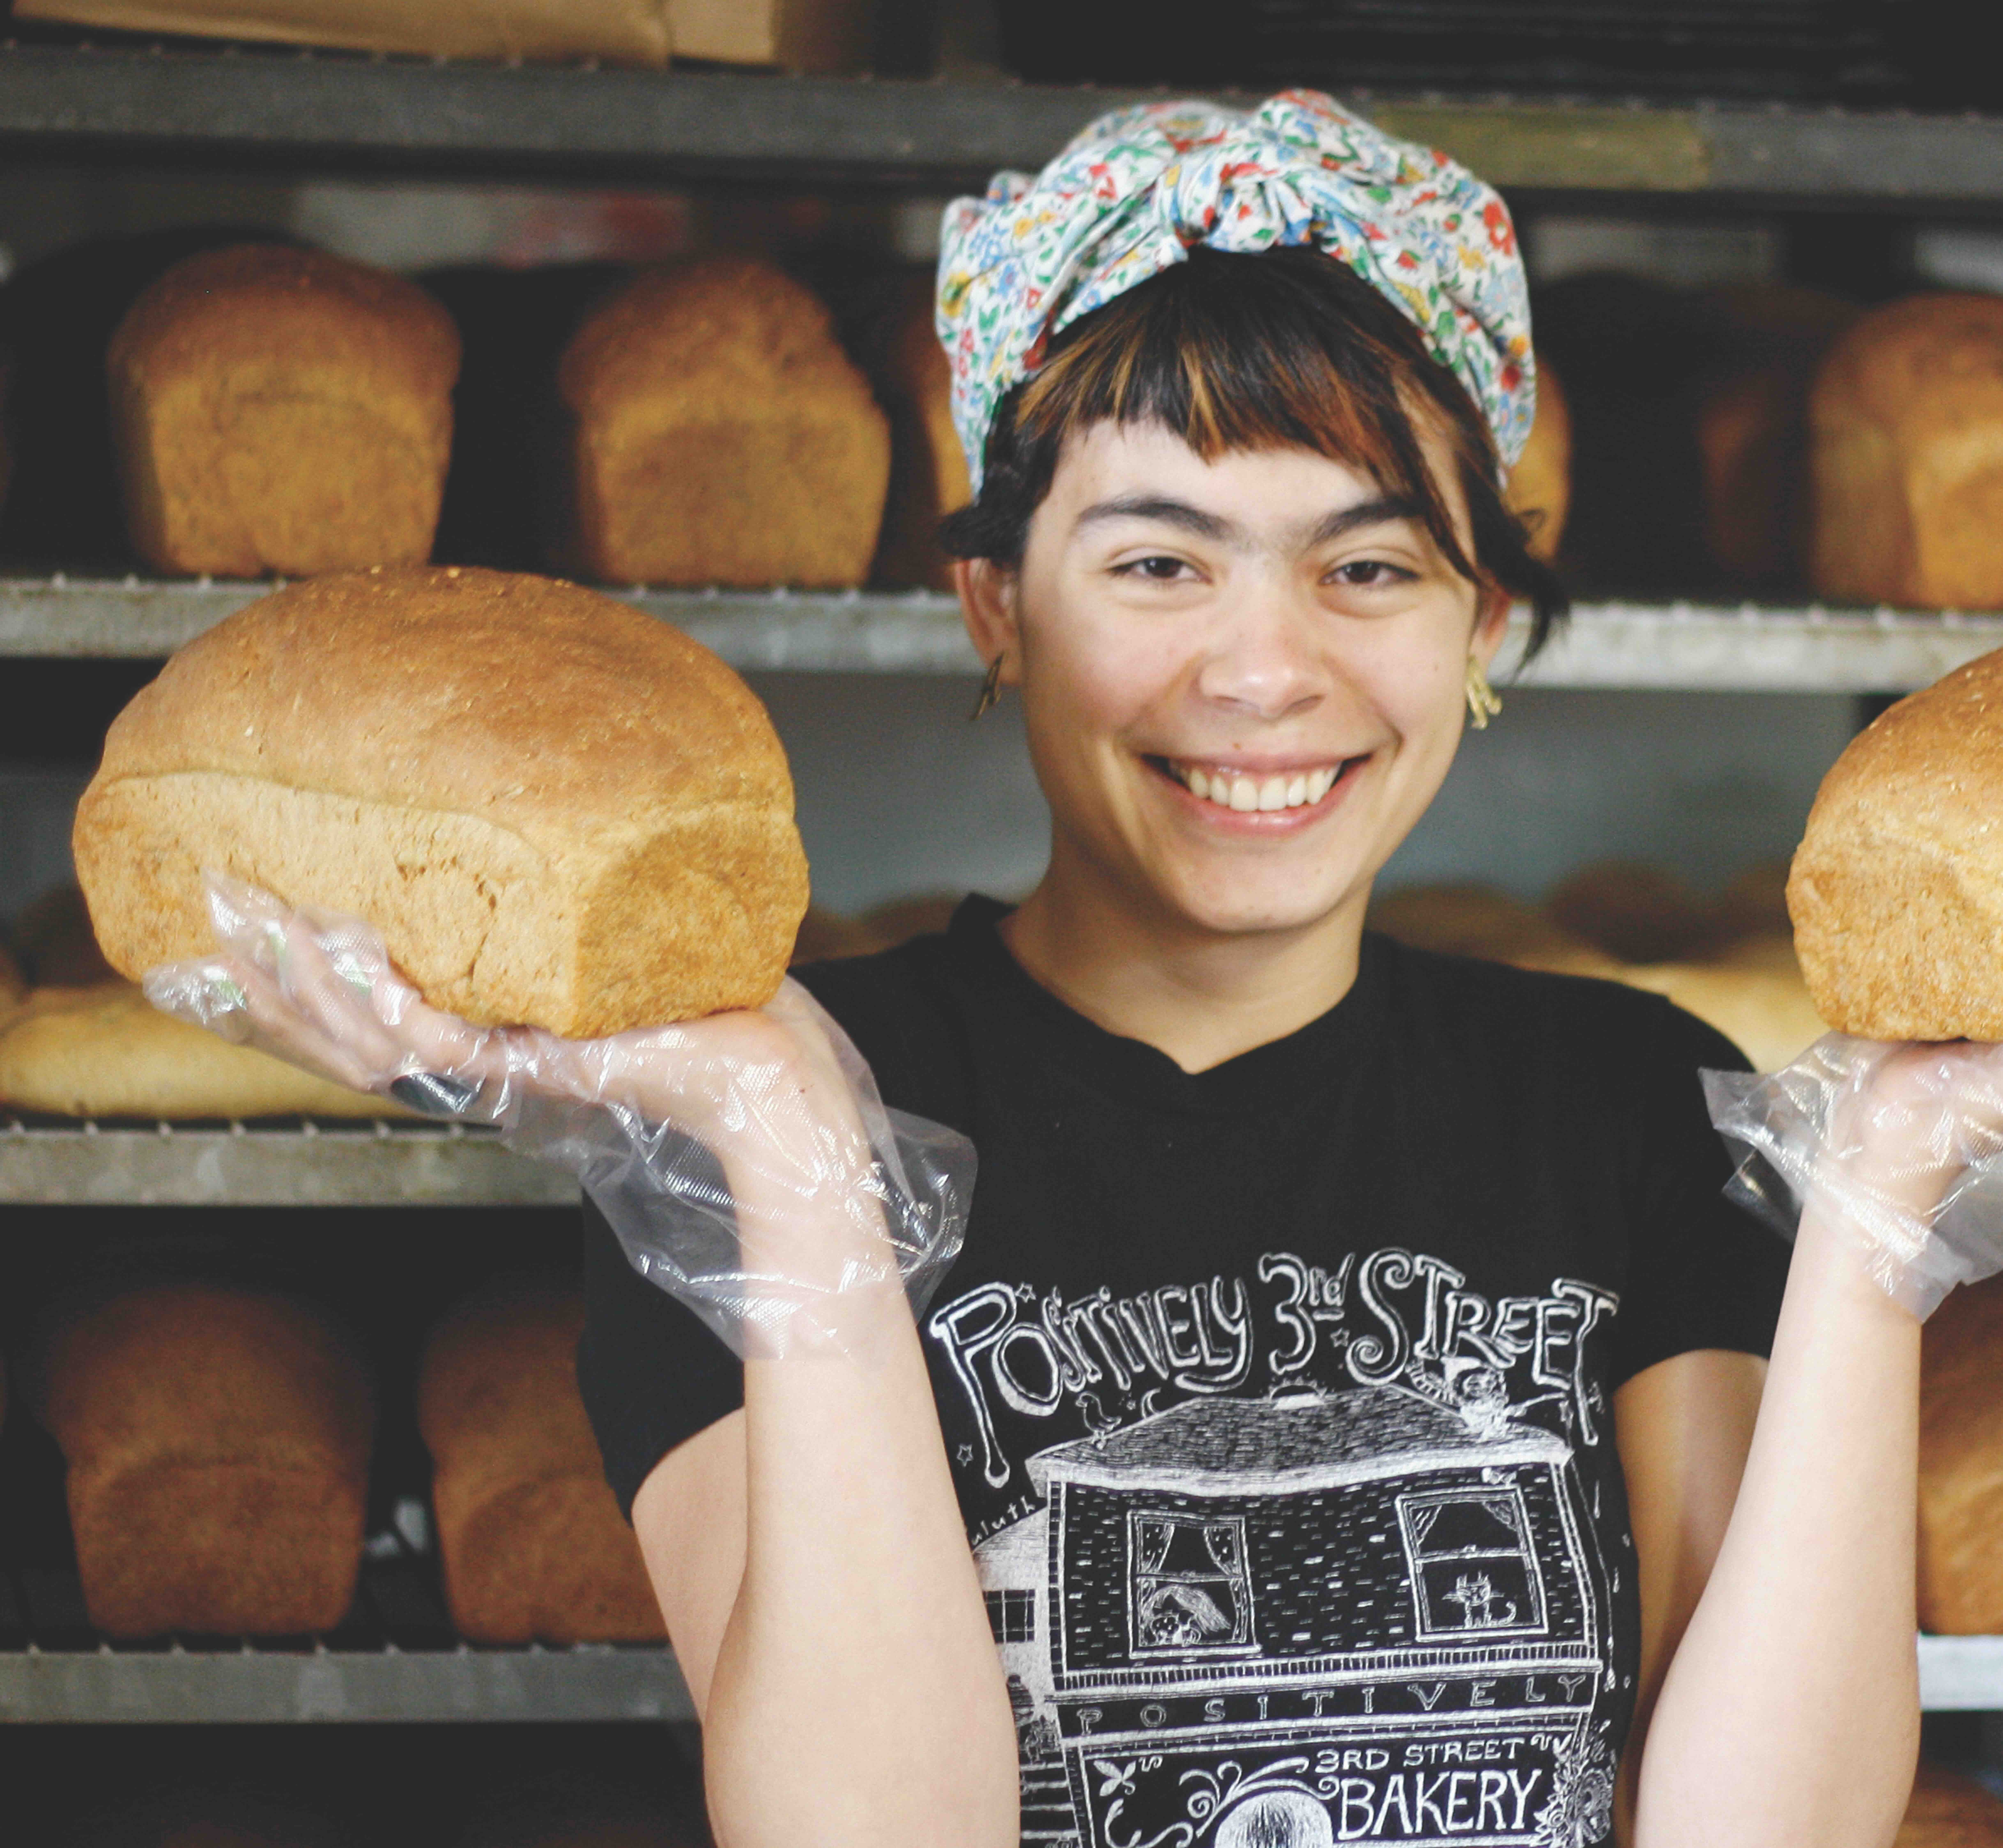 Woman wearing a Positively 3rd Street Bakery t-shirt, holding a loaf of bread in each hand